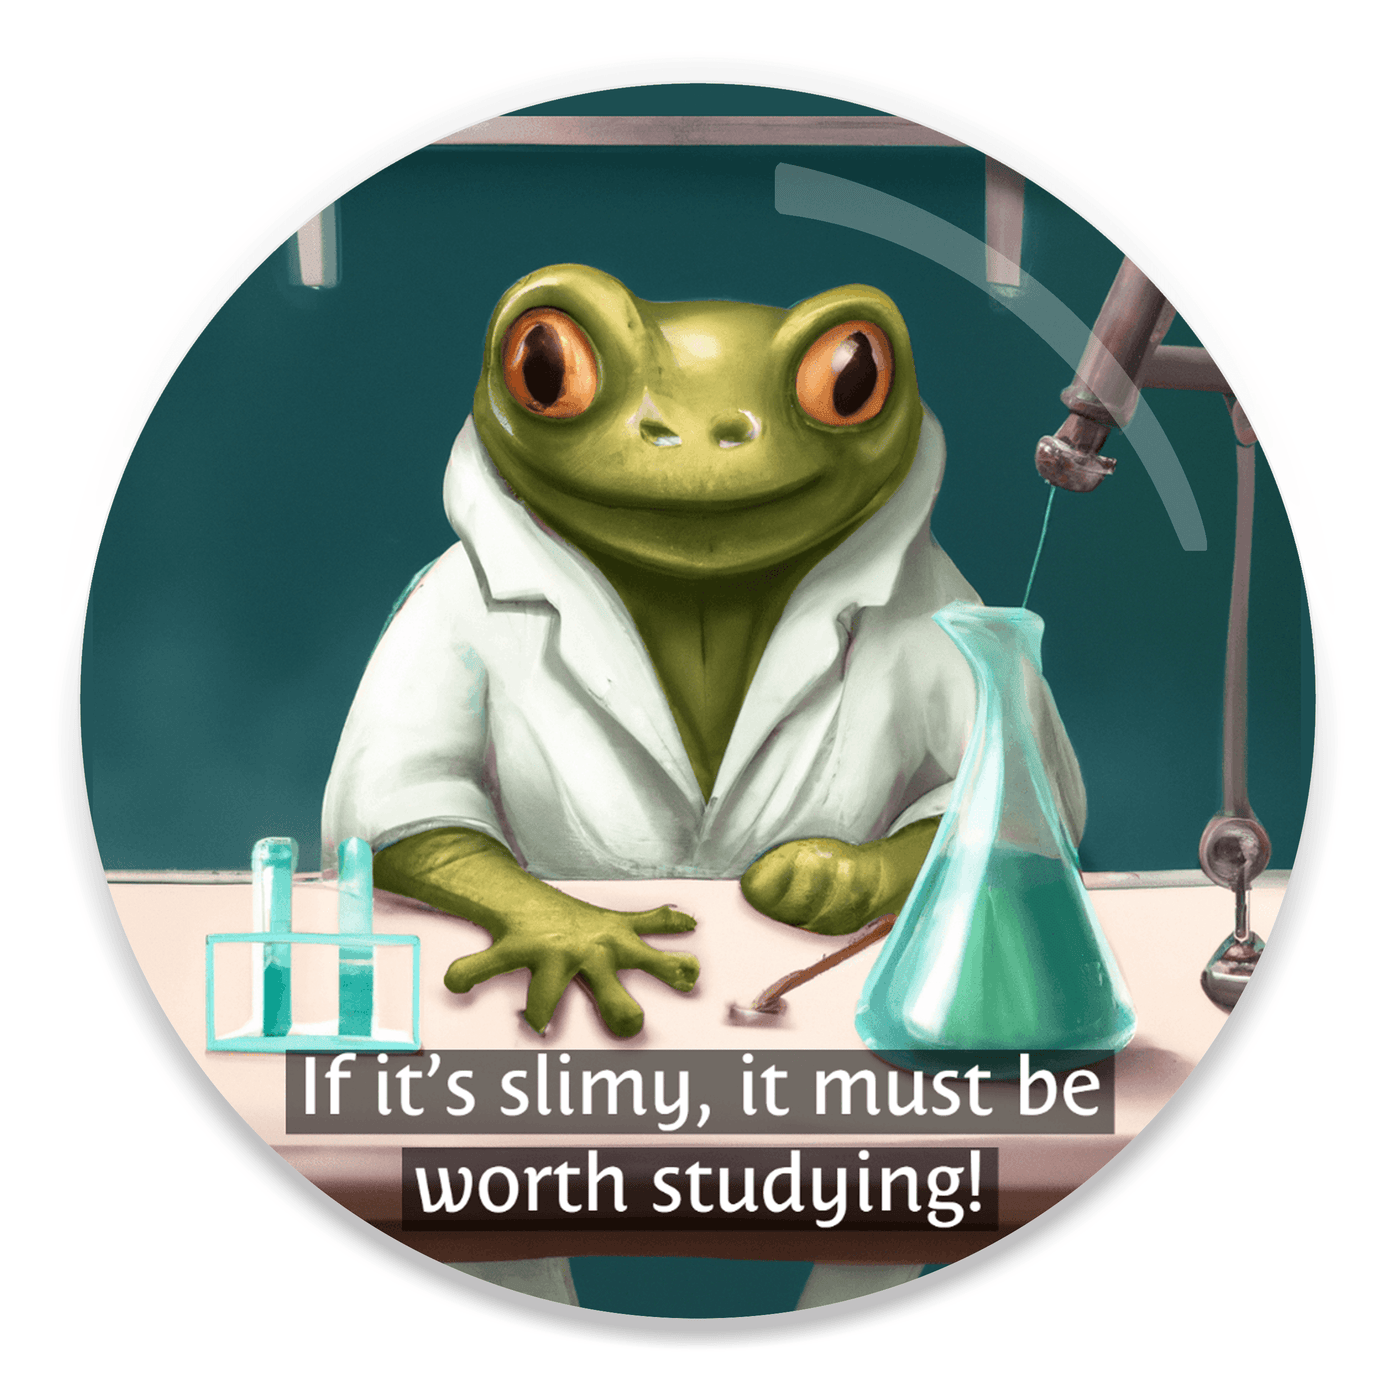 2.25 inch round colorful magnet with image of a frog in a lab coat